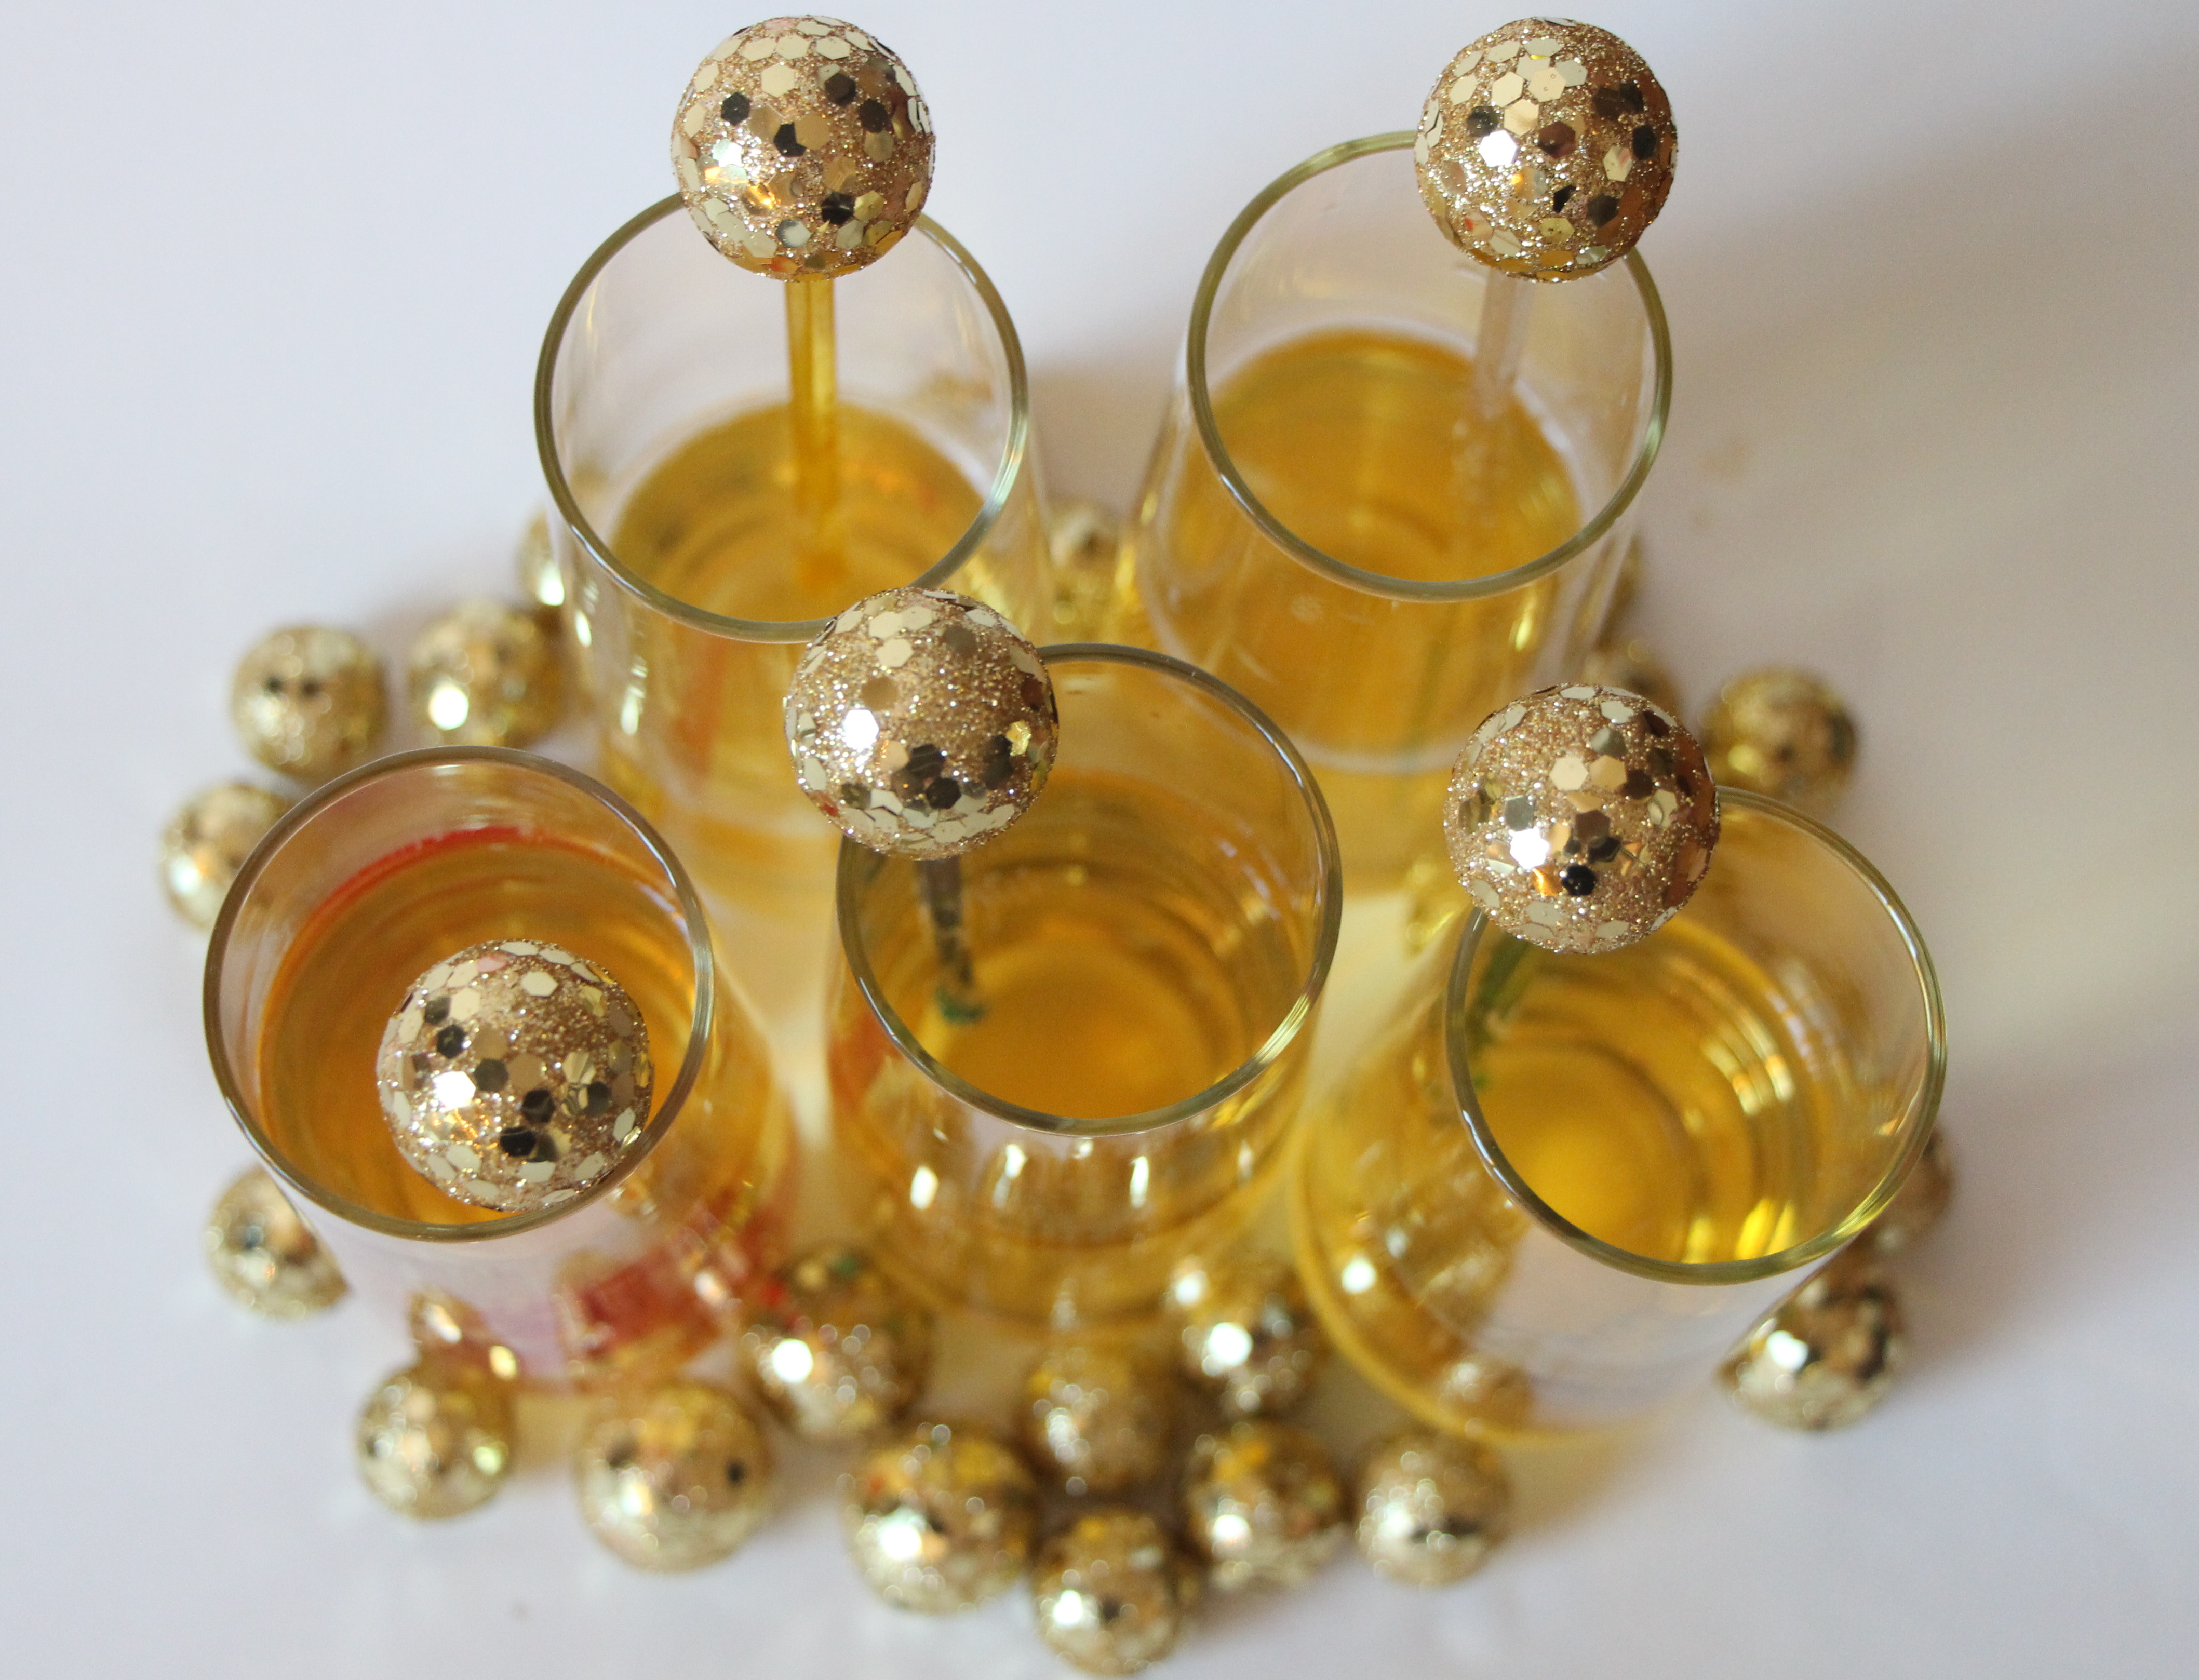 DIY New Year's Eve Party Drink Sticks